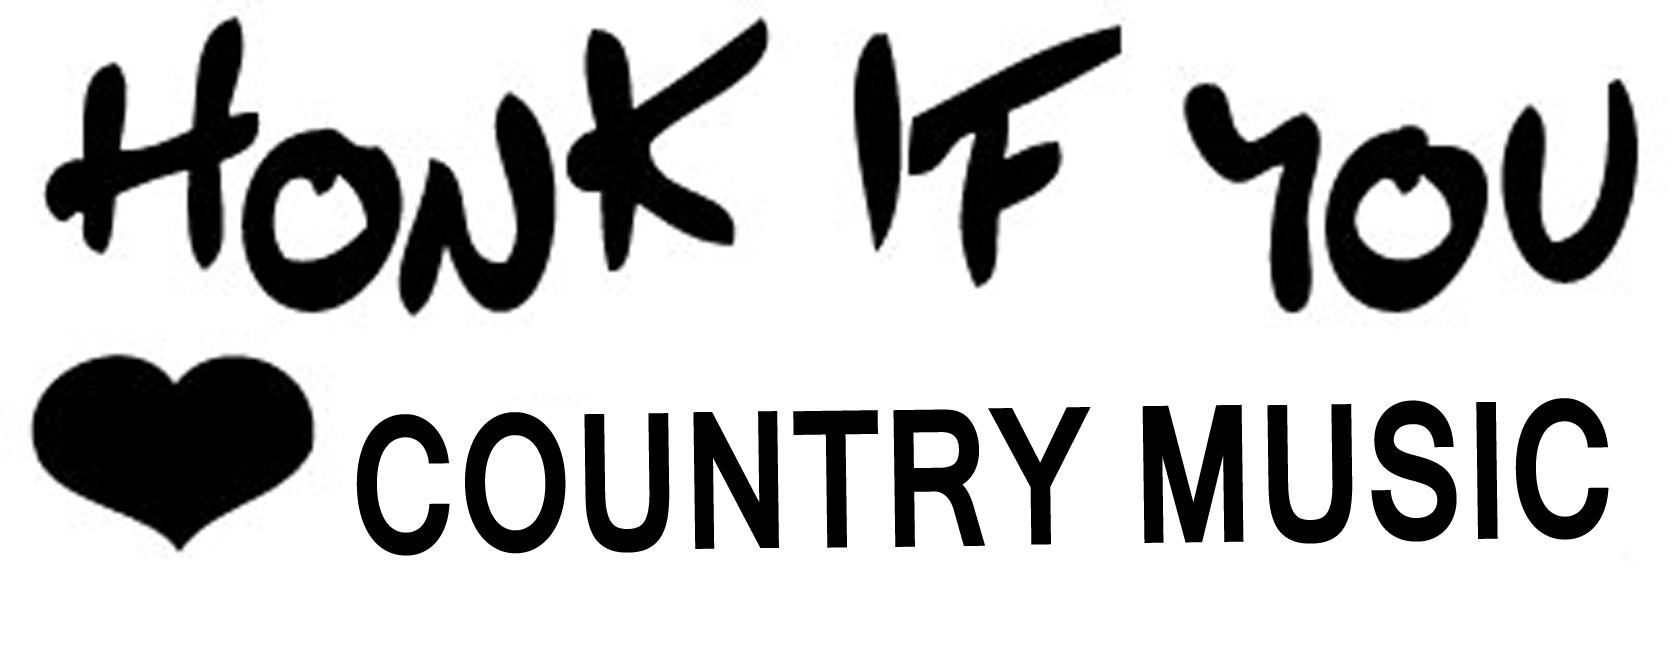 Honk if you Love Country Music Sticker